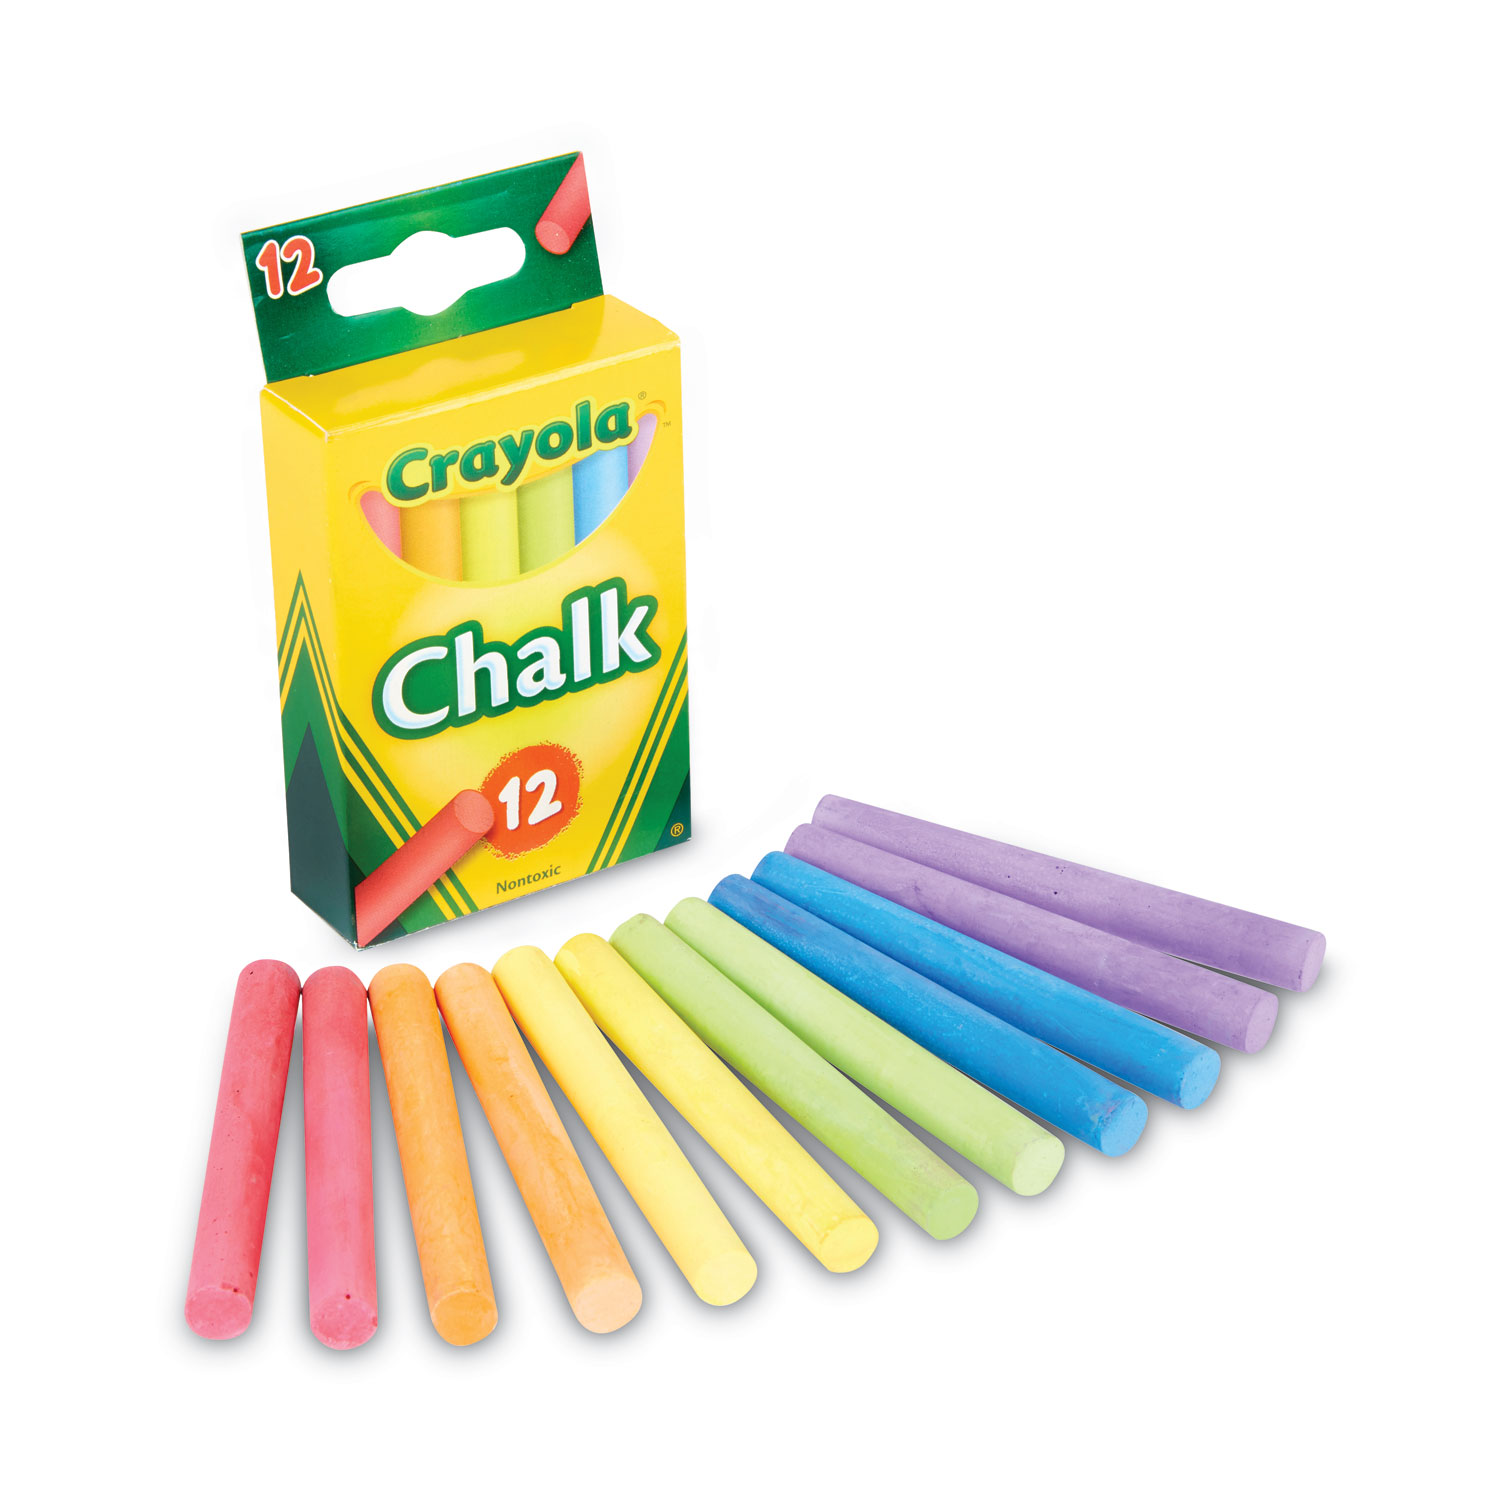  Crayola Products - Crayola - Air-Dry Clay, 25 lbs., White -  Sold As 1 Each - The clay makes solid, durable forms without need for  baking in an oven or firing